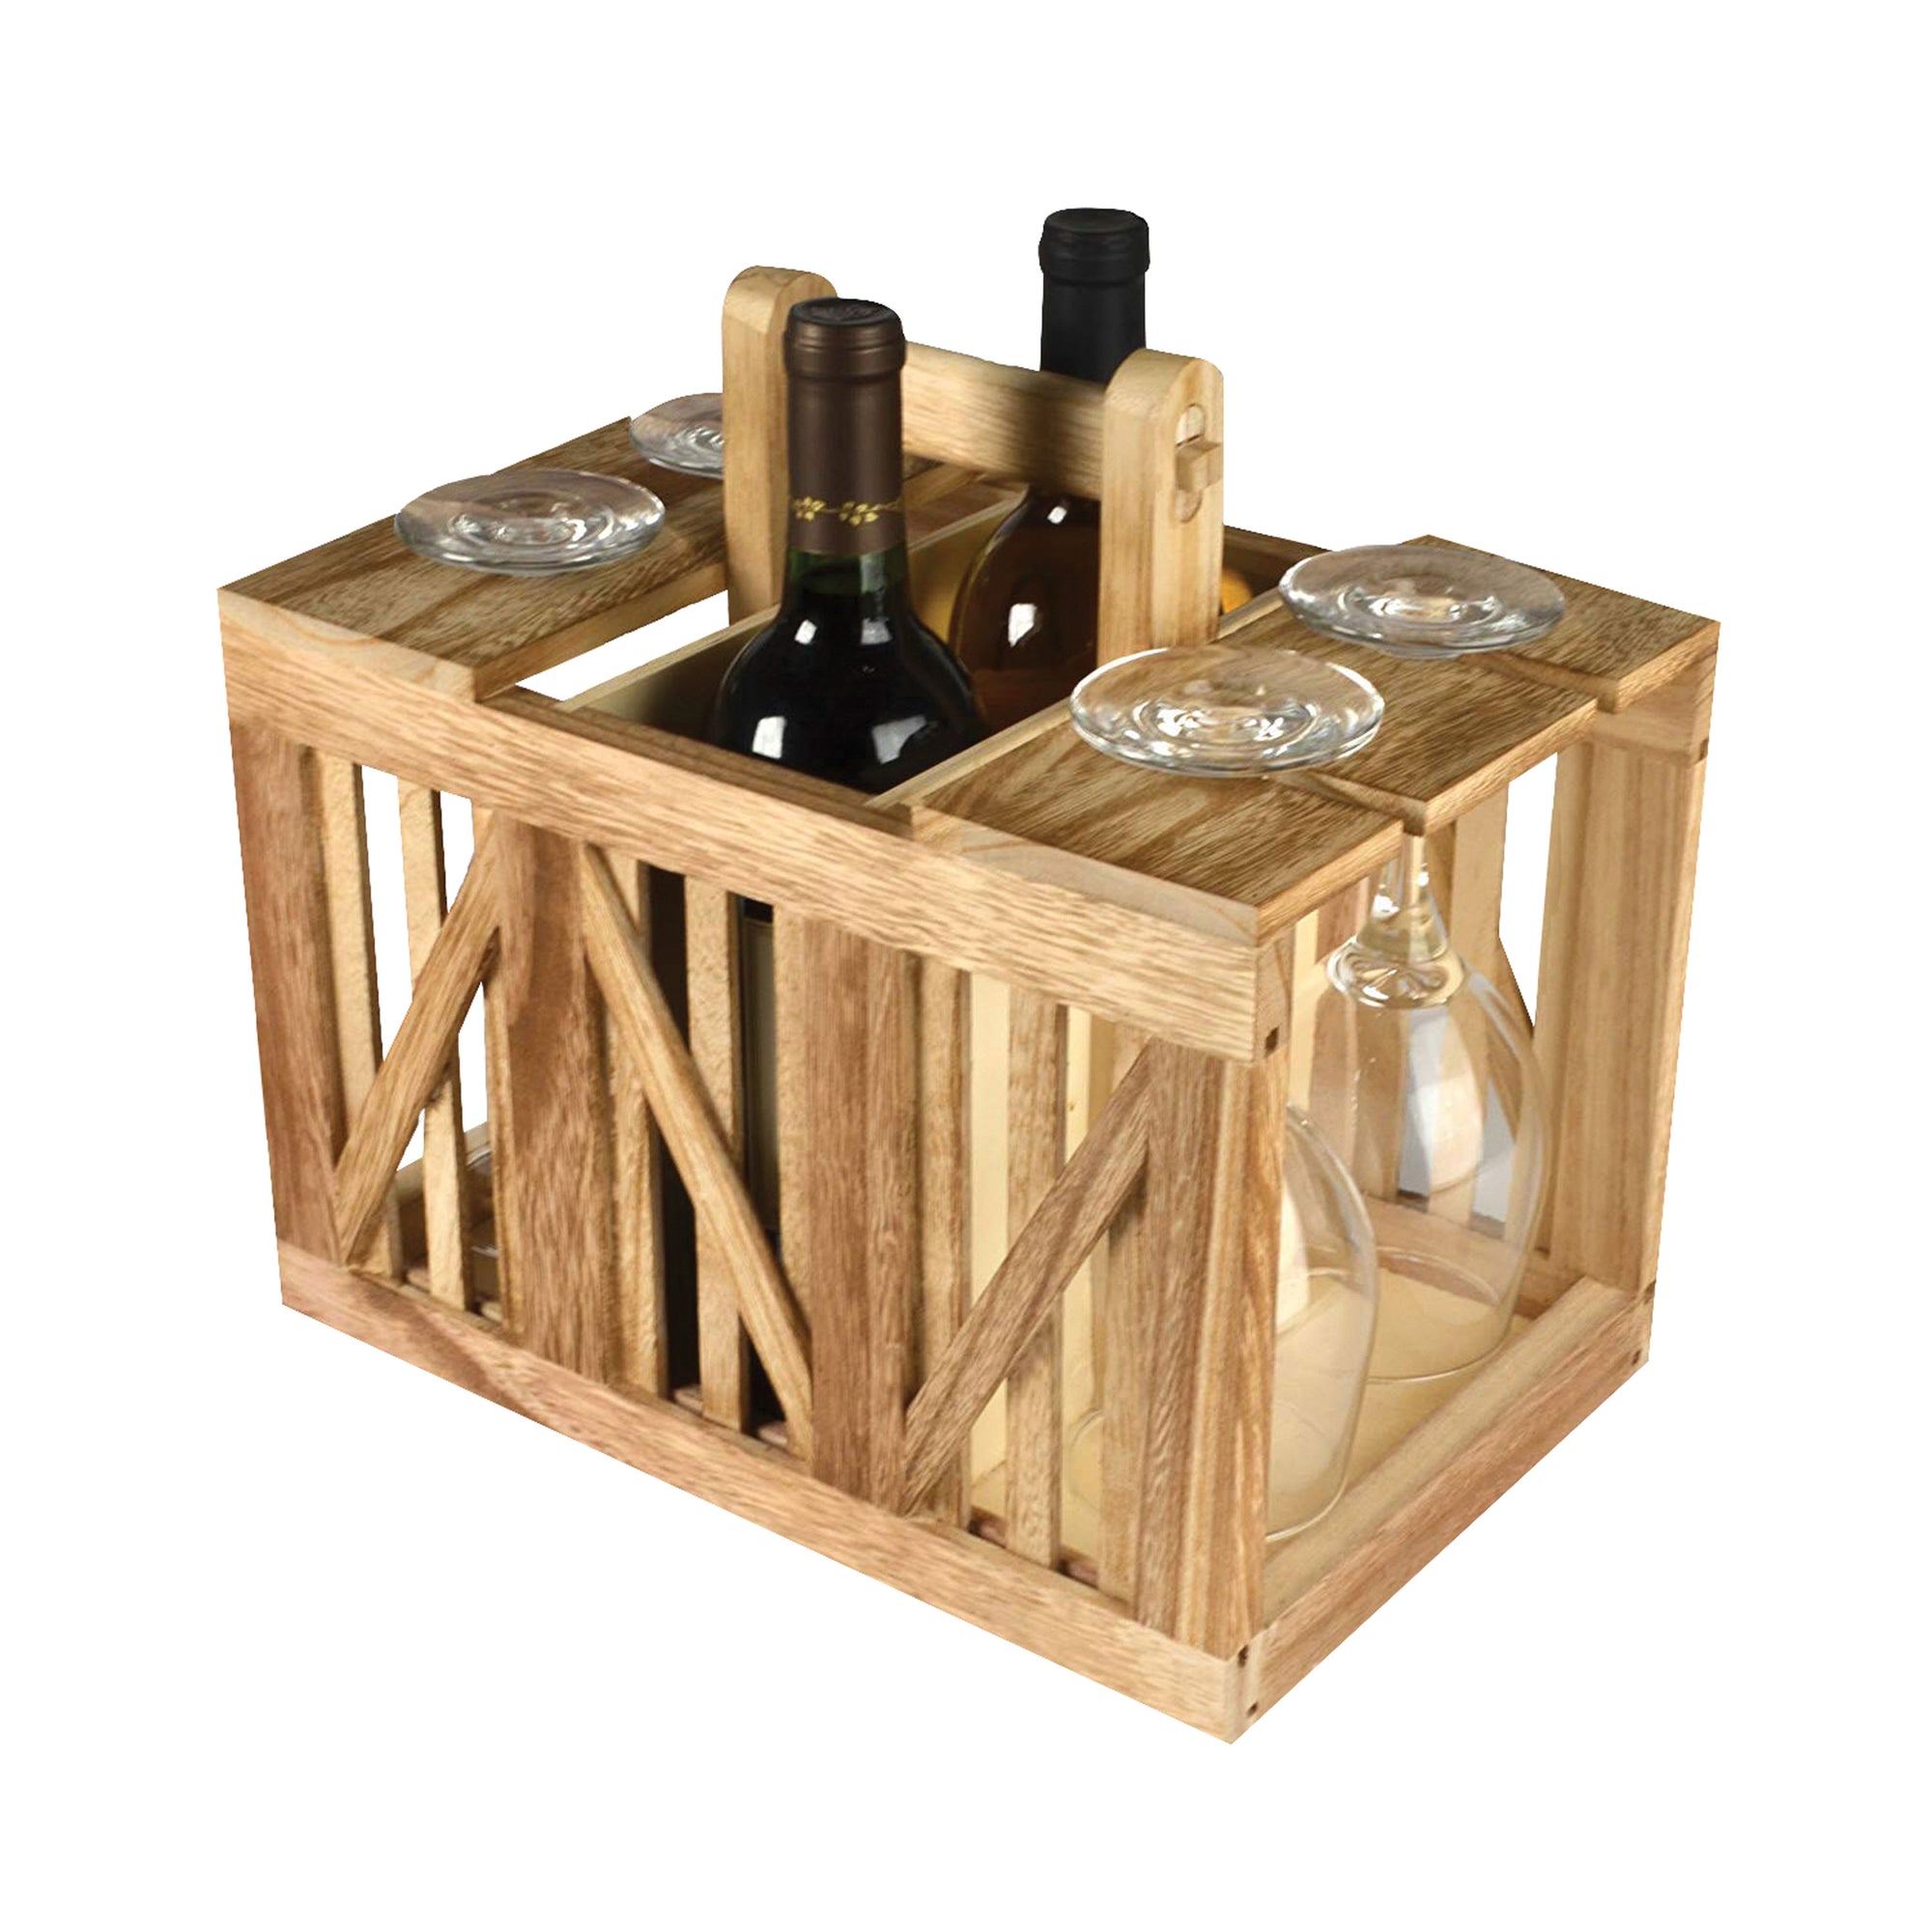 Outdoors Unlimited 22109 Wood Wine Caddy Crate